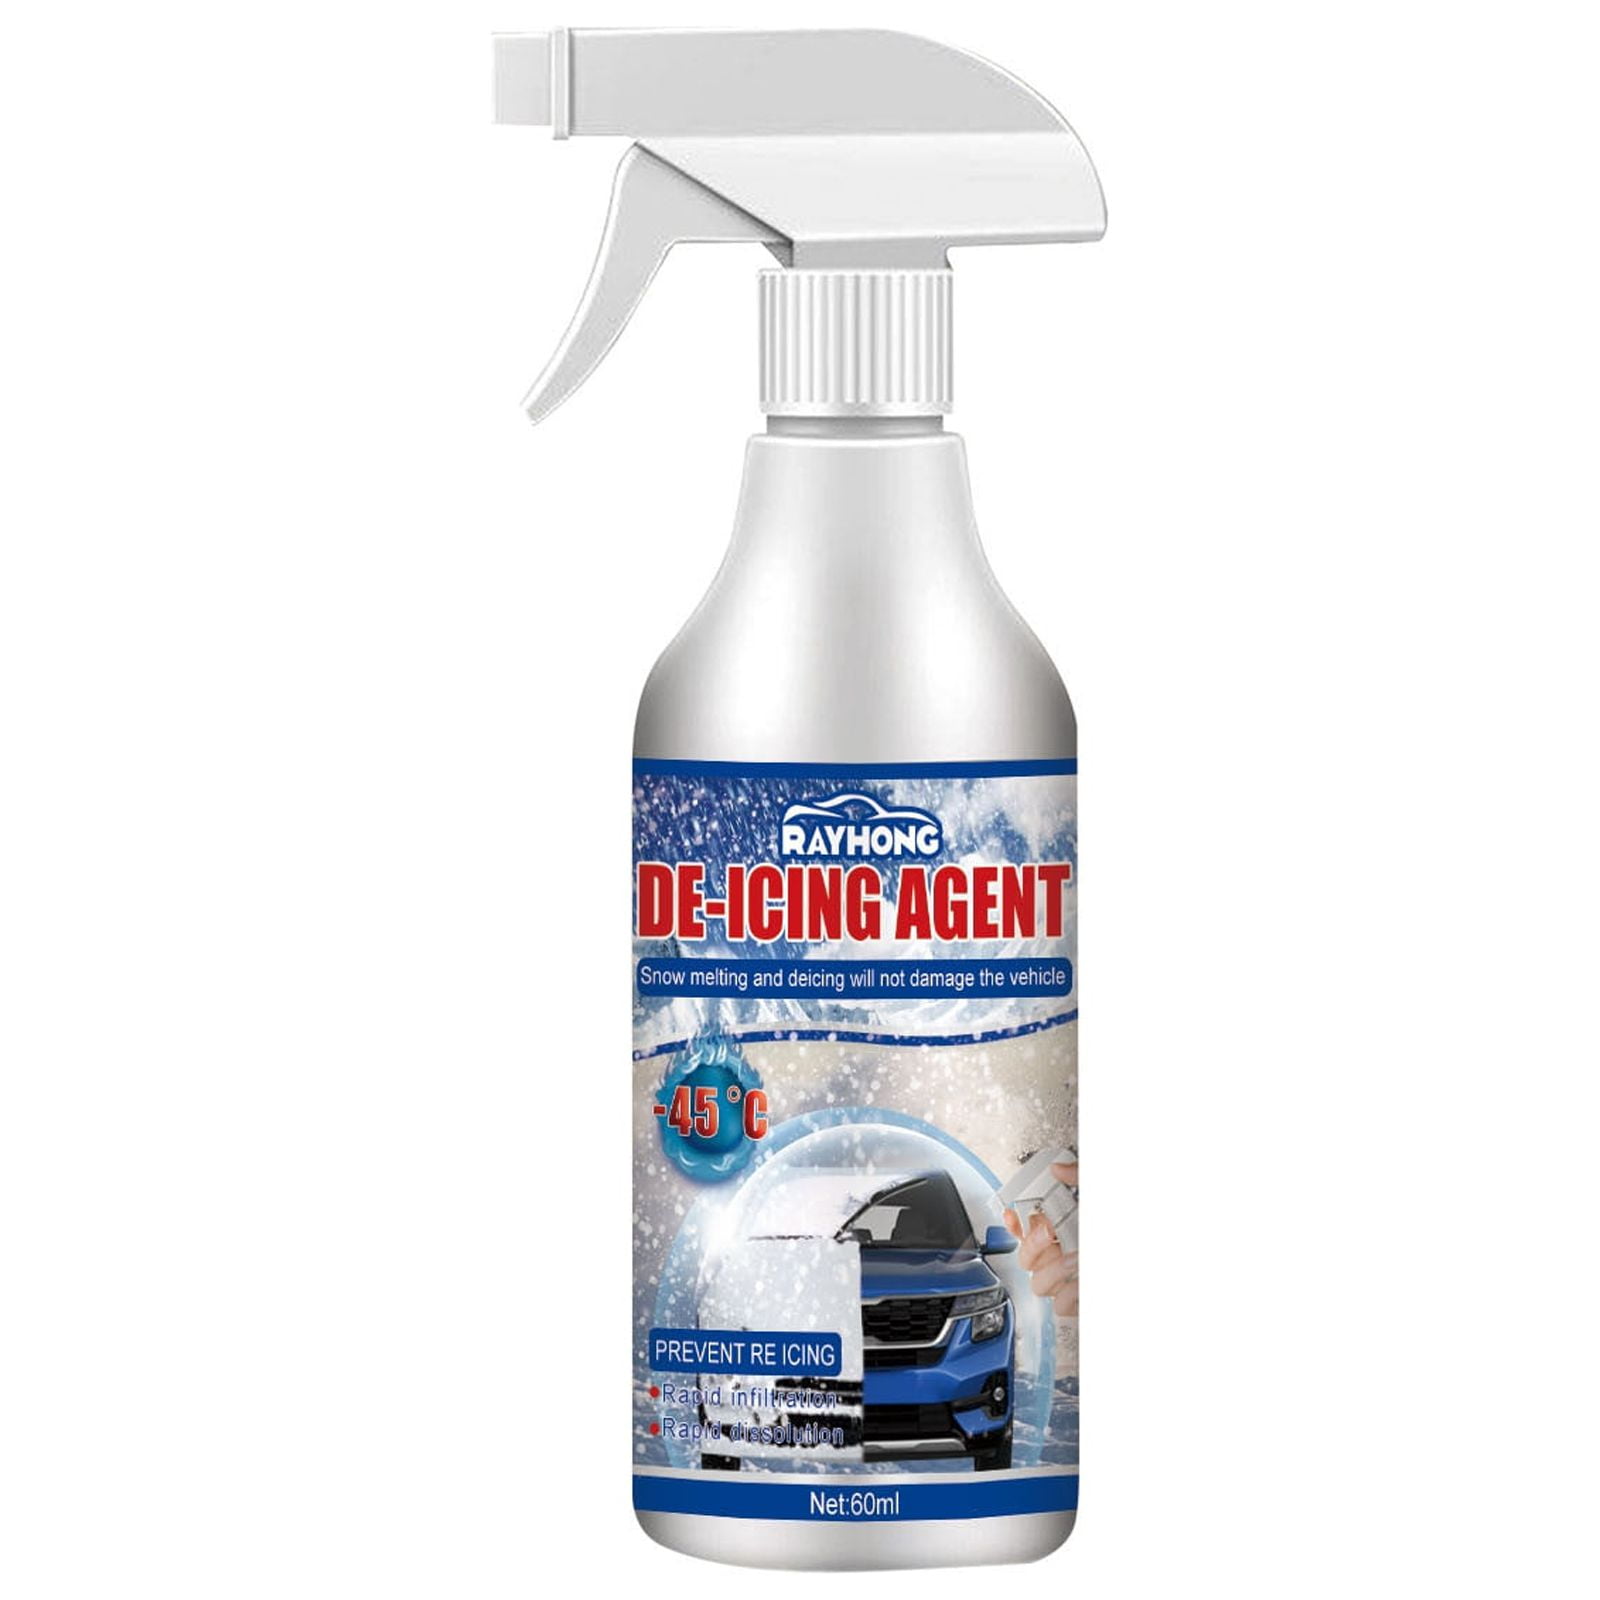 Super Deicer Spray (500 mL) effectively cleared of ice and white frost